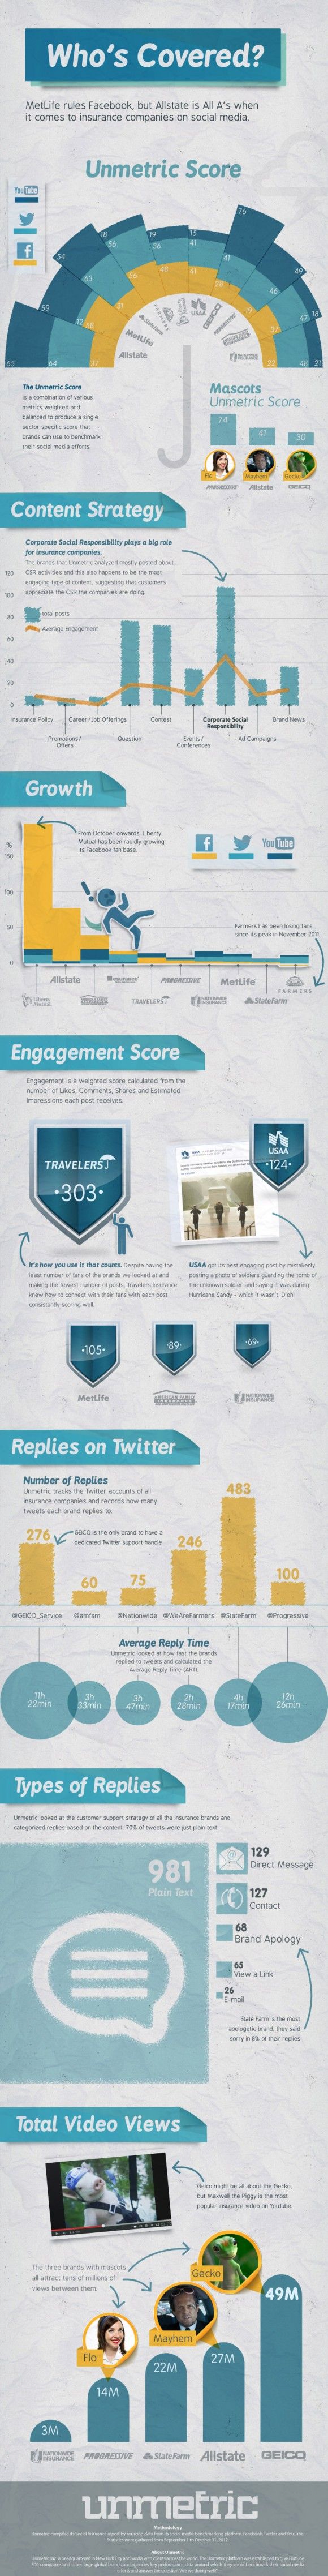 unmetric-insurance-infographic-social-media-today